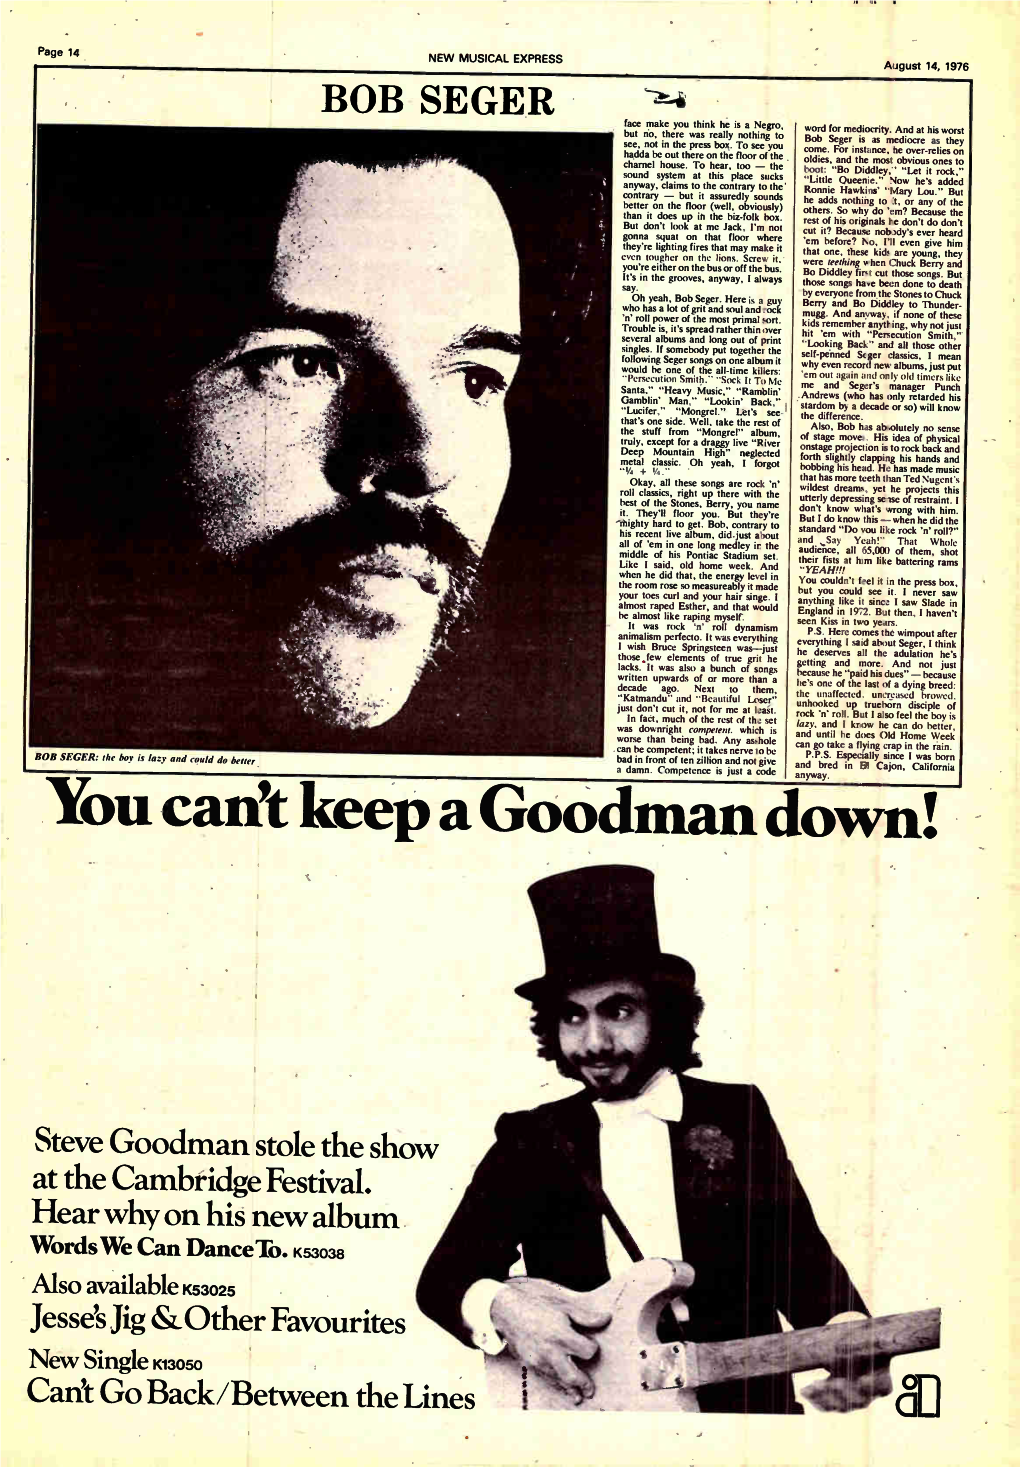 You Can't Keep a Goodman Down!